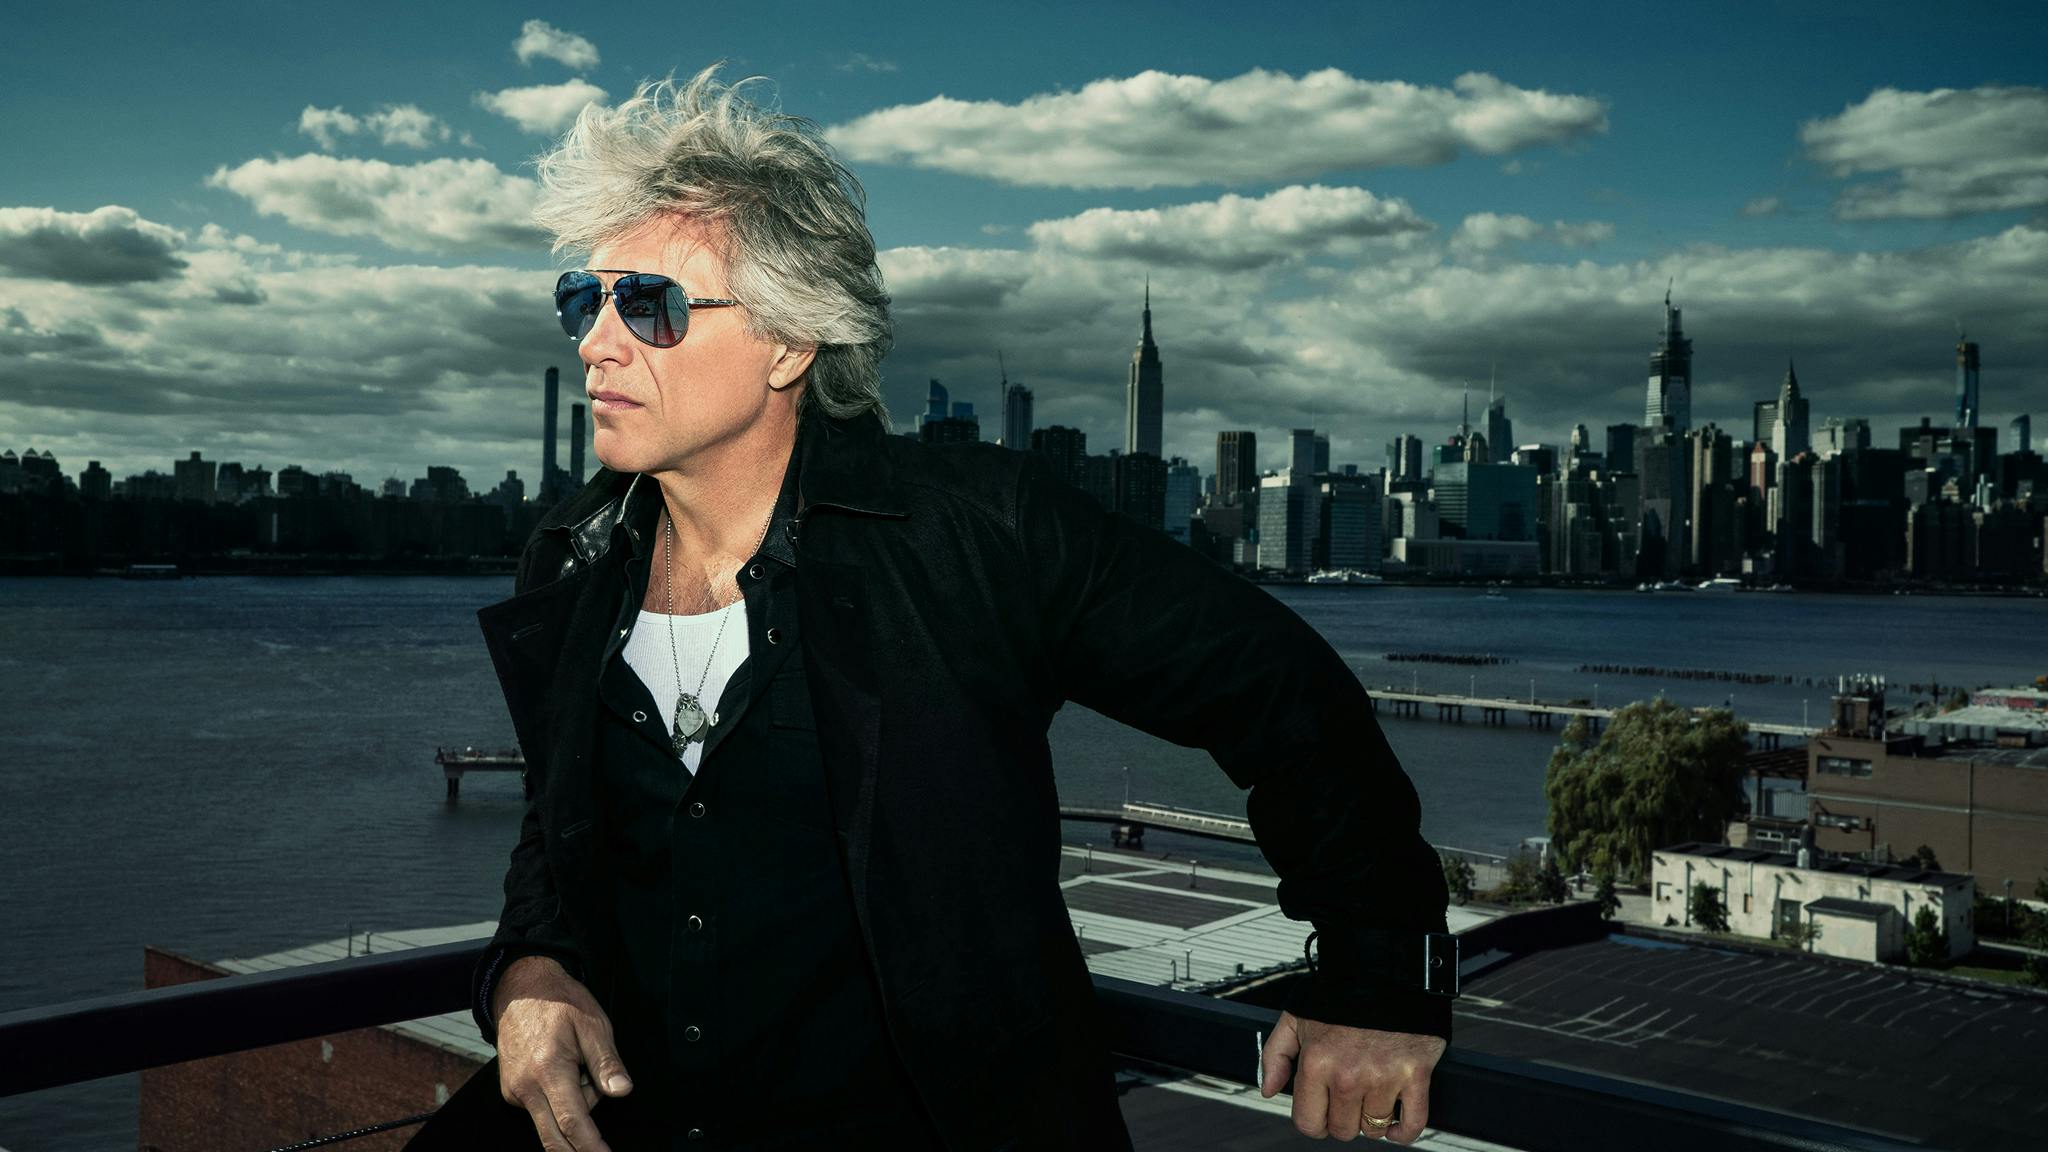 Jon Bon Jovi: “I didn’t want to perform half-assed. If it was the end, I was good with that”